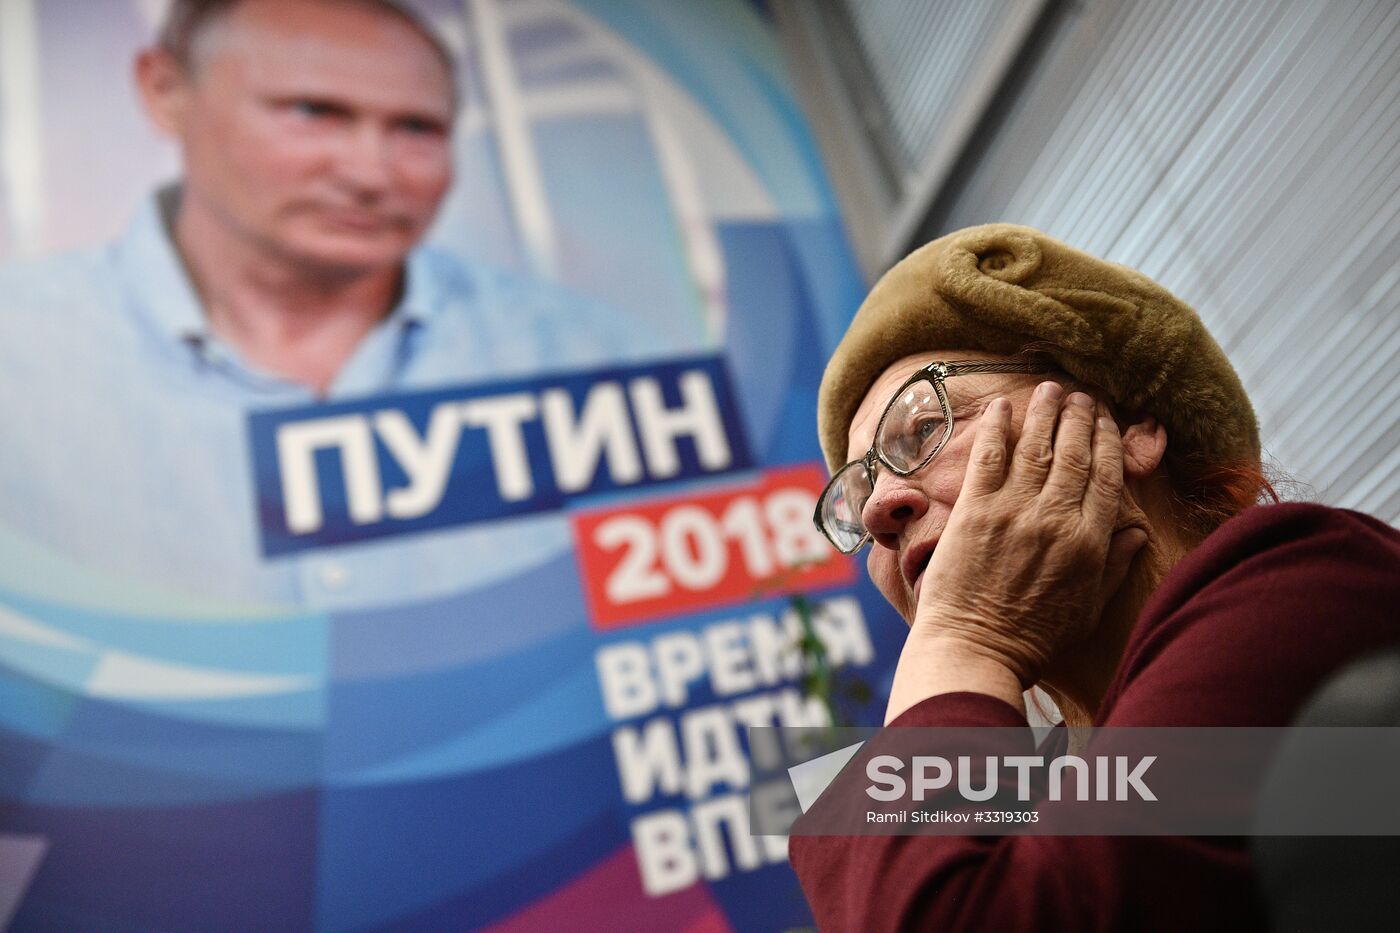 Moscow's public reception office of presidential candidate Vladimir Putin's campaign headquarters